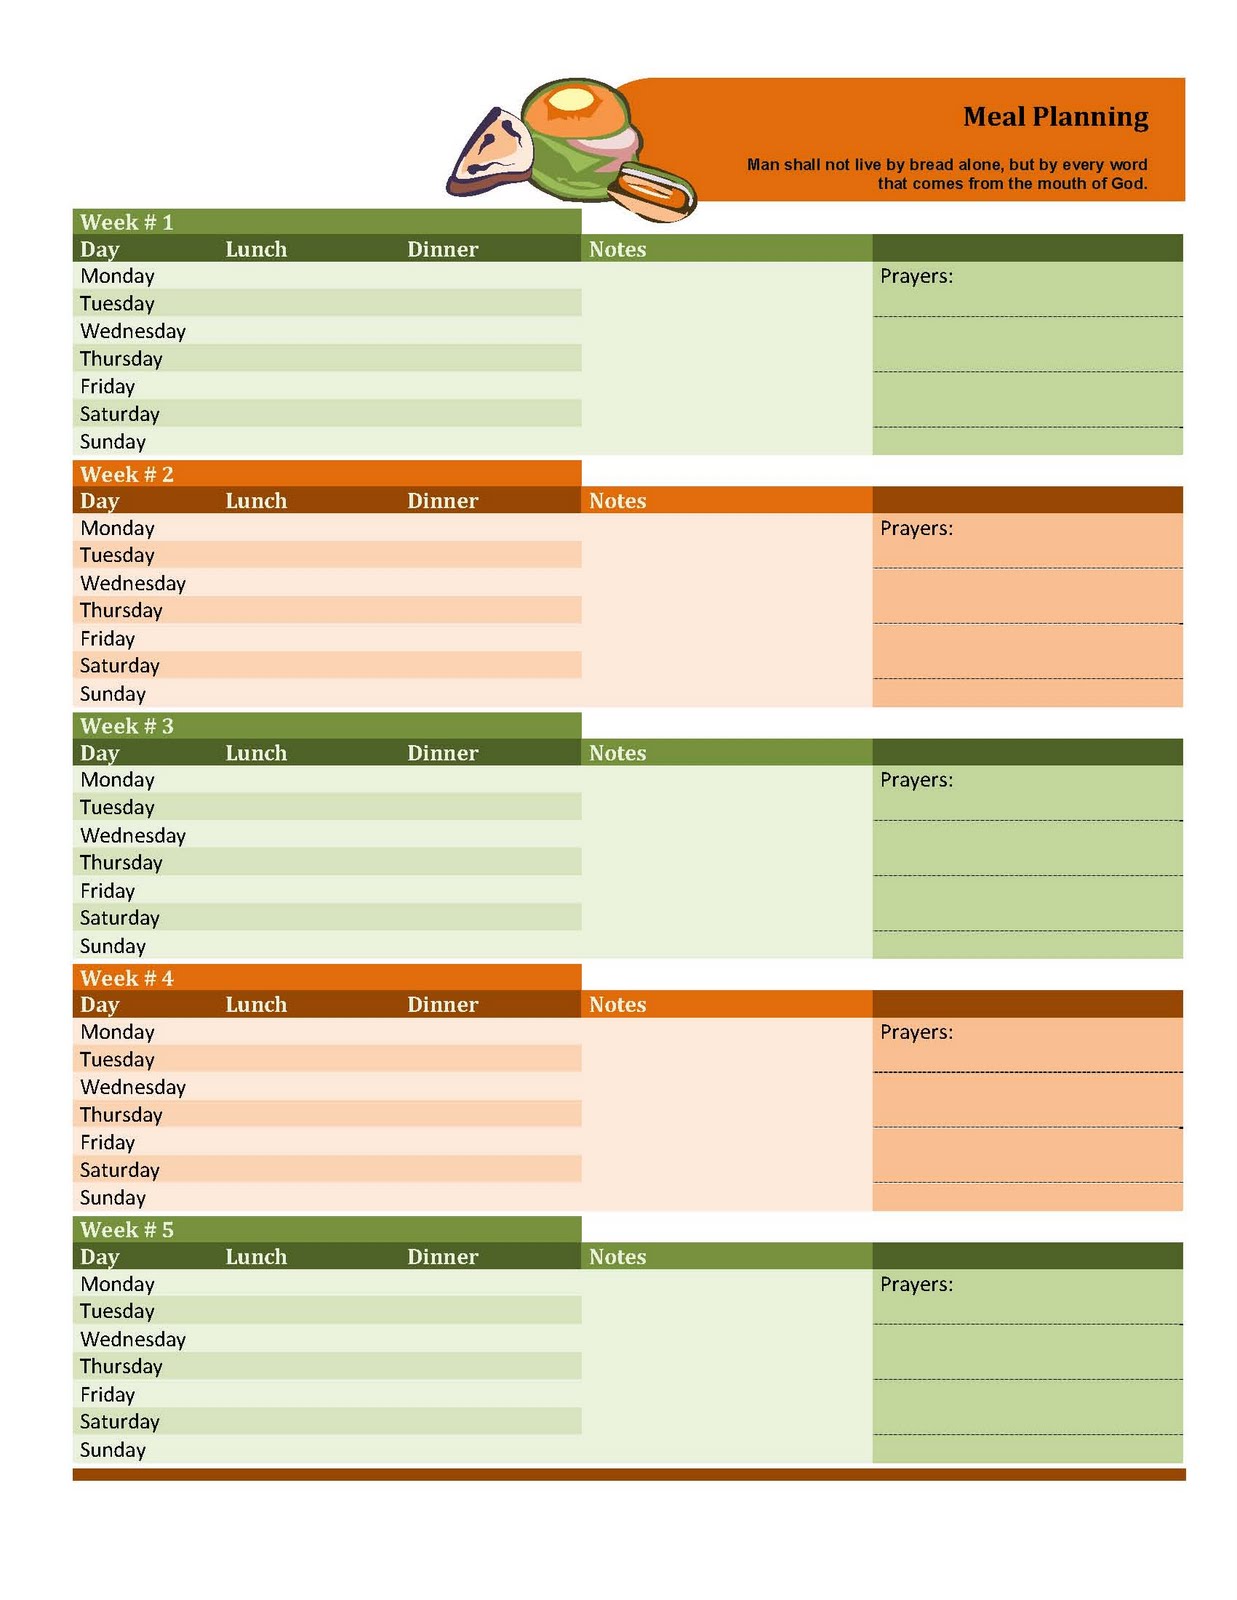 I Shoulda Turned Left: Meal Planning in One Page